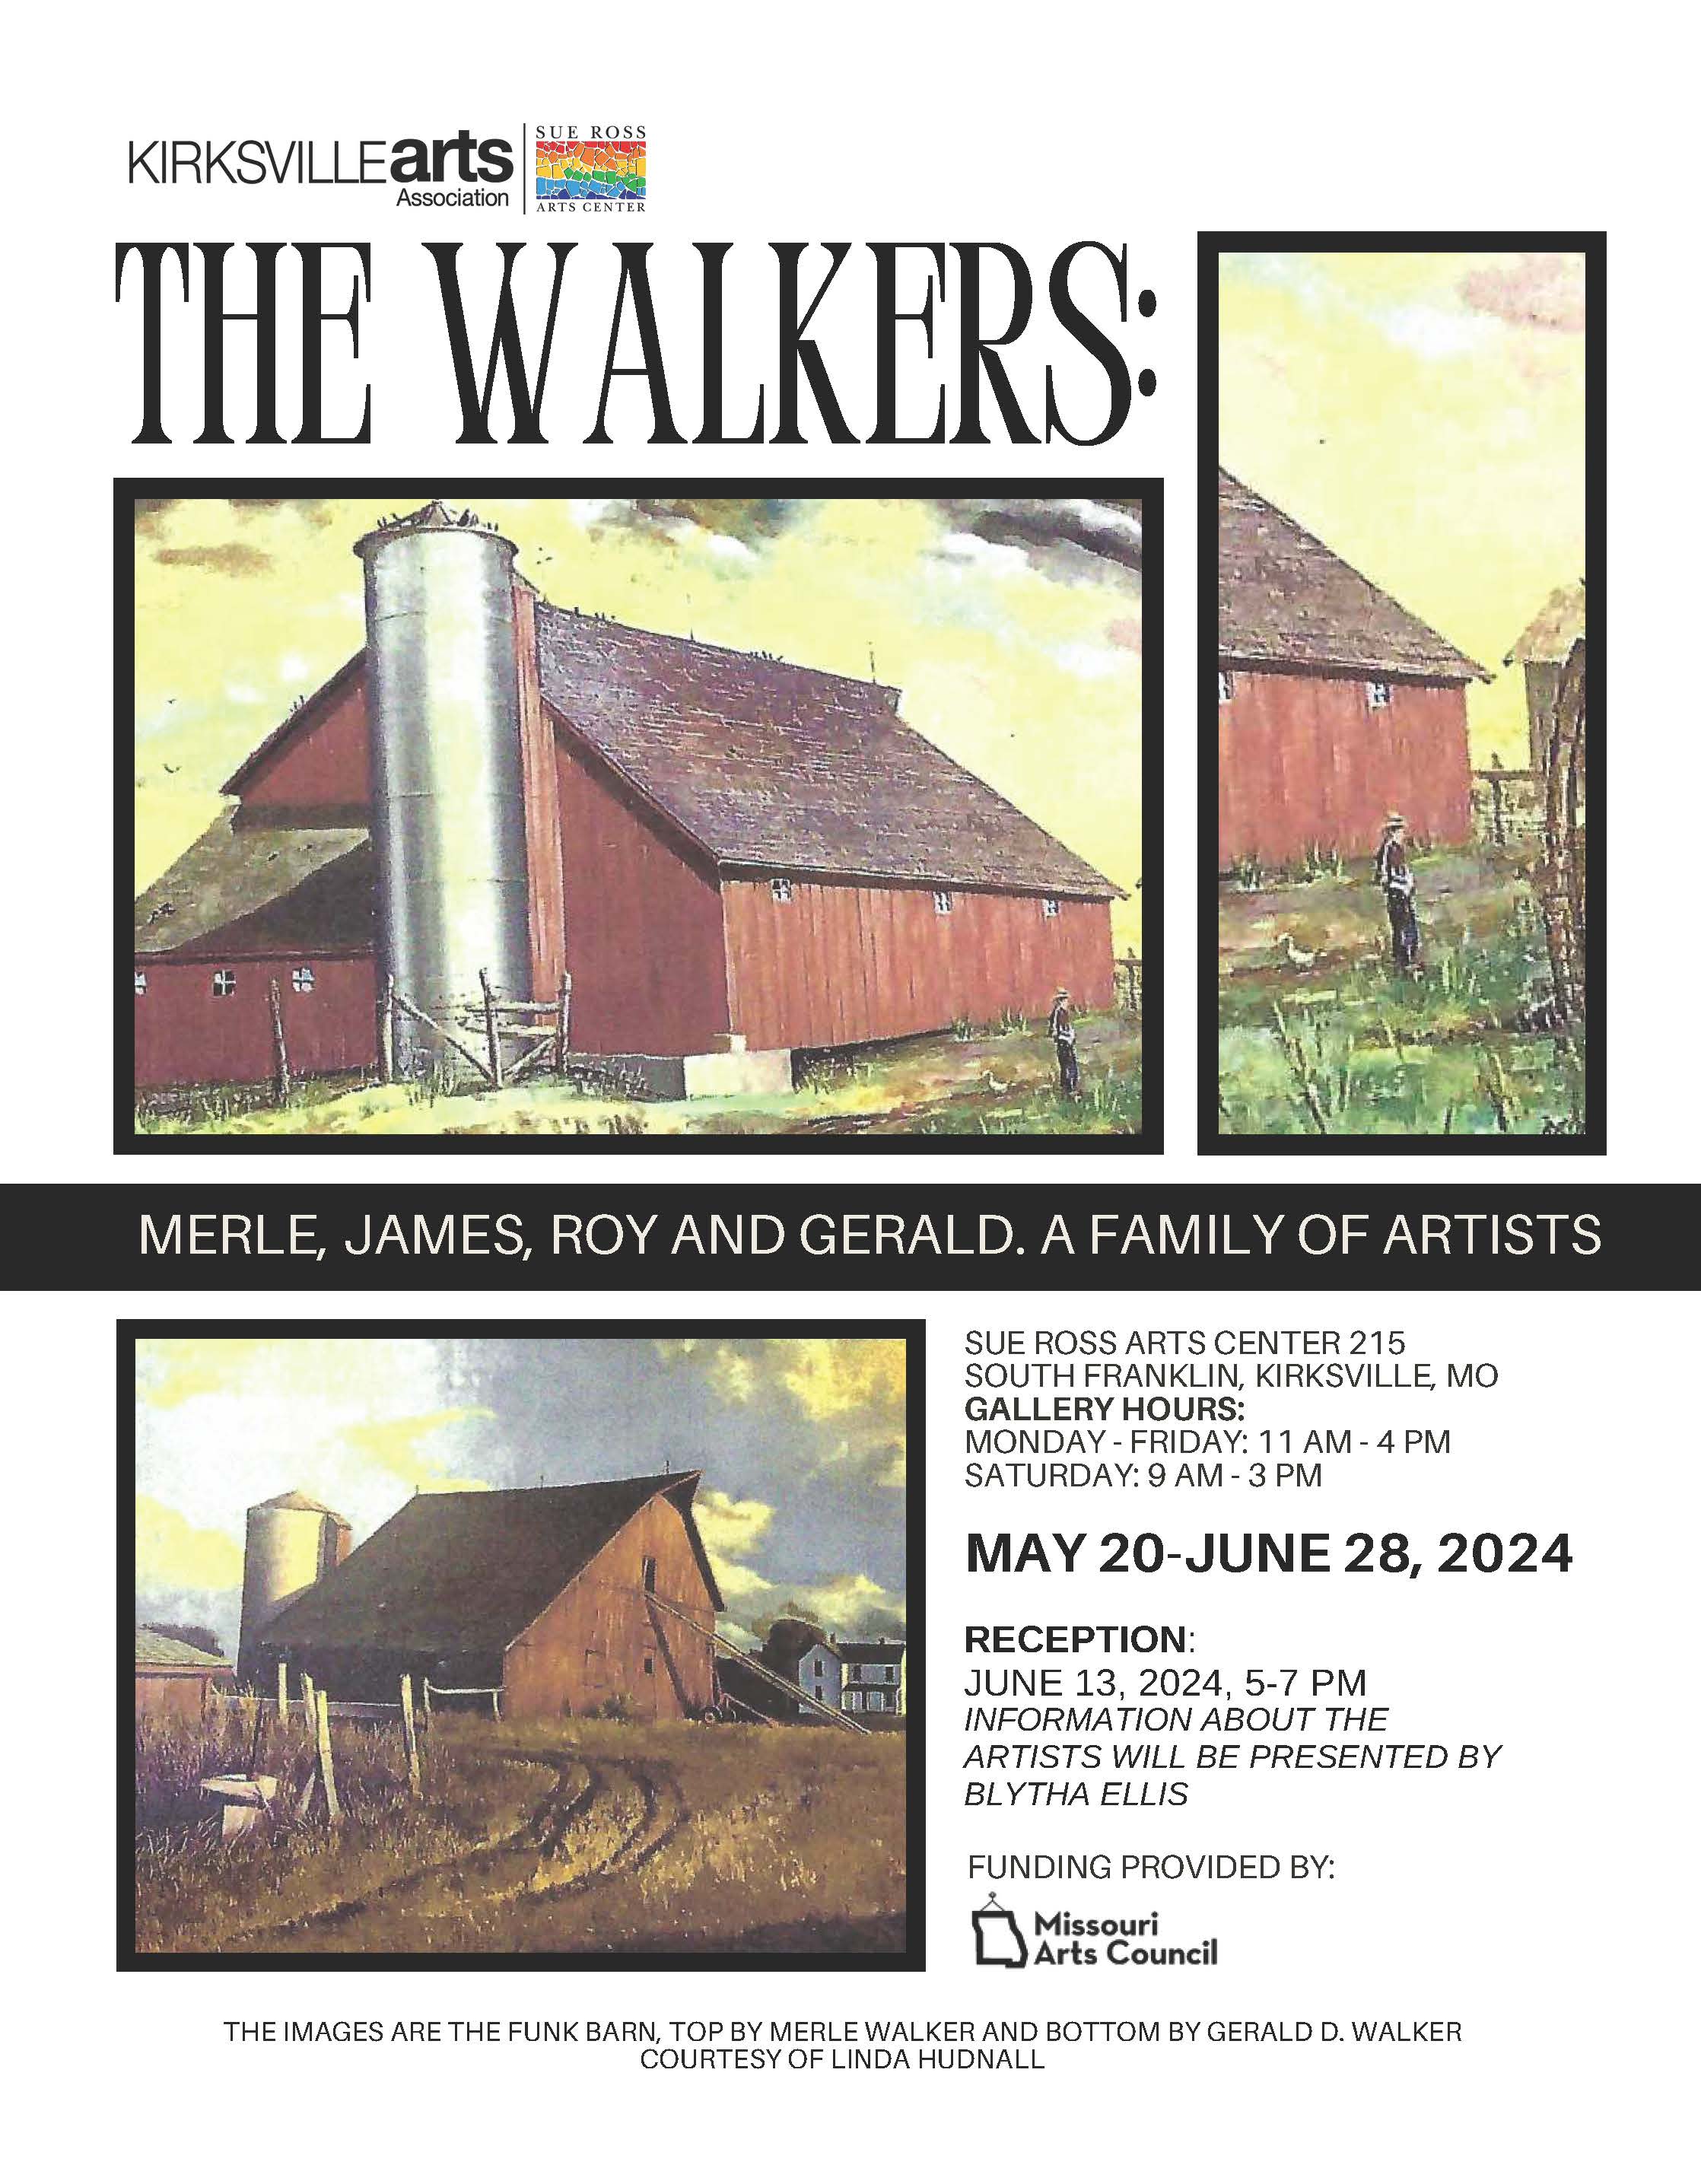 Check more about Walker Family Exhibition